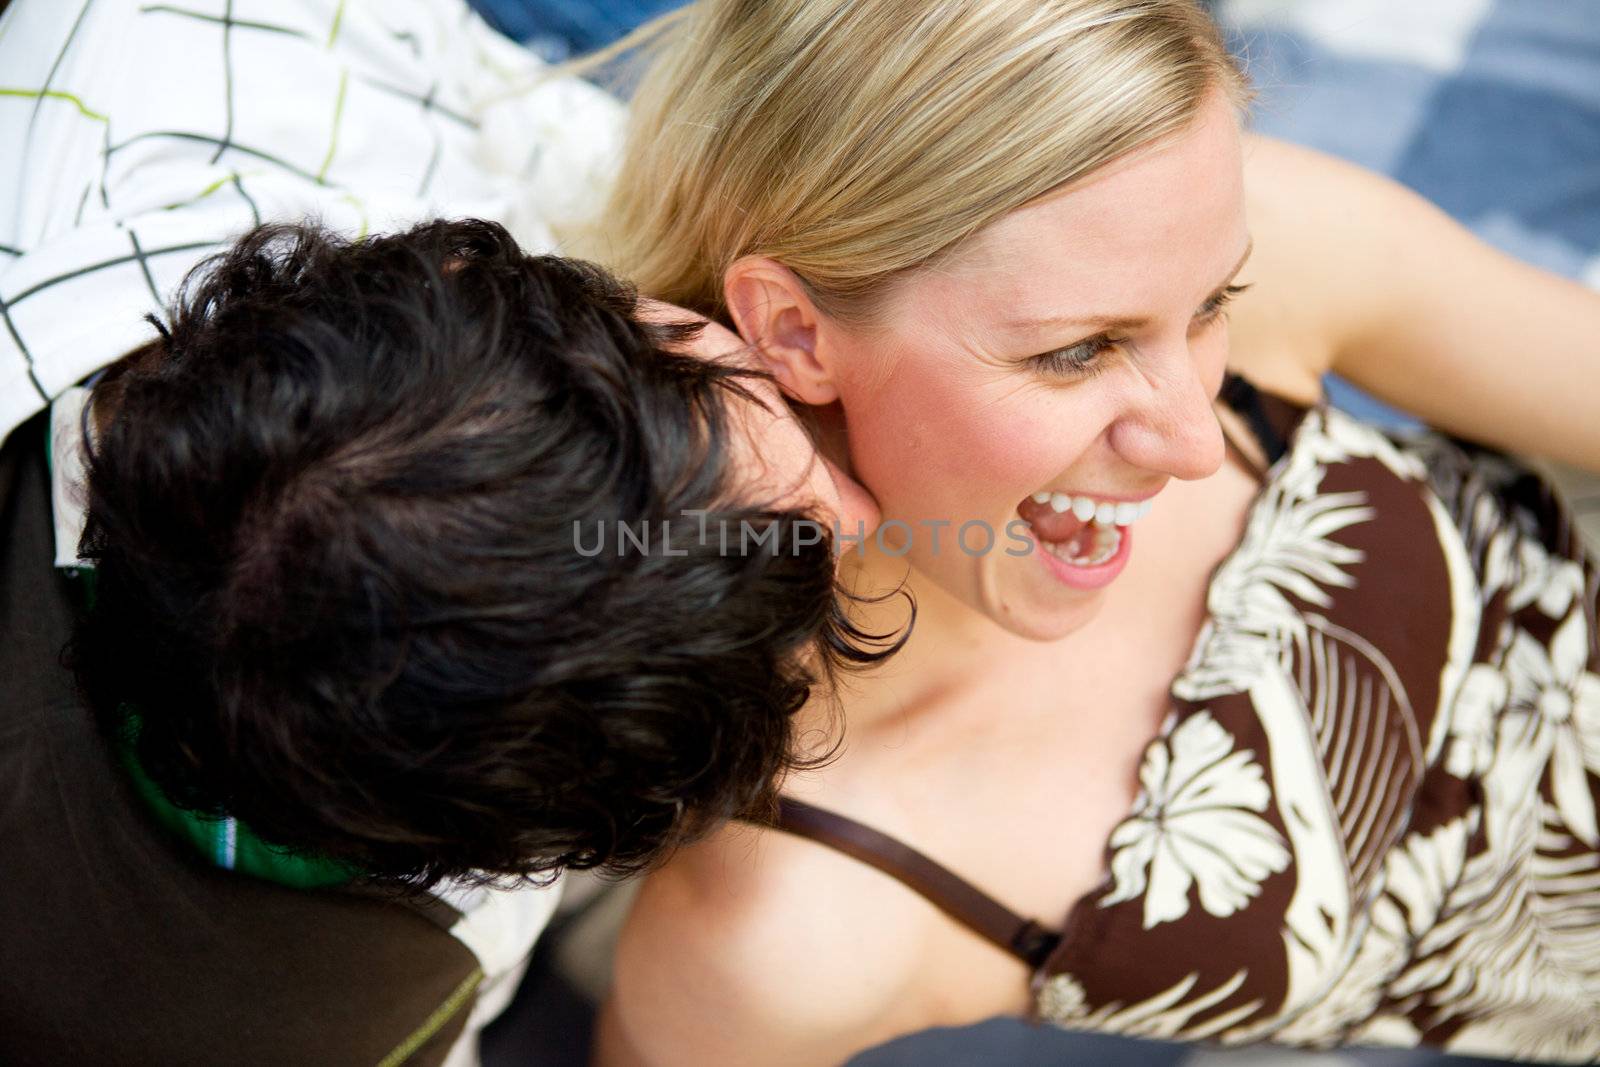 A man kissing a woman on the neck and a woman smiling